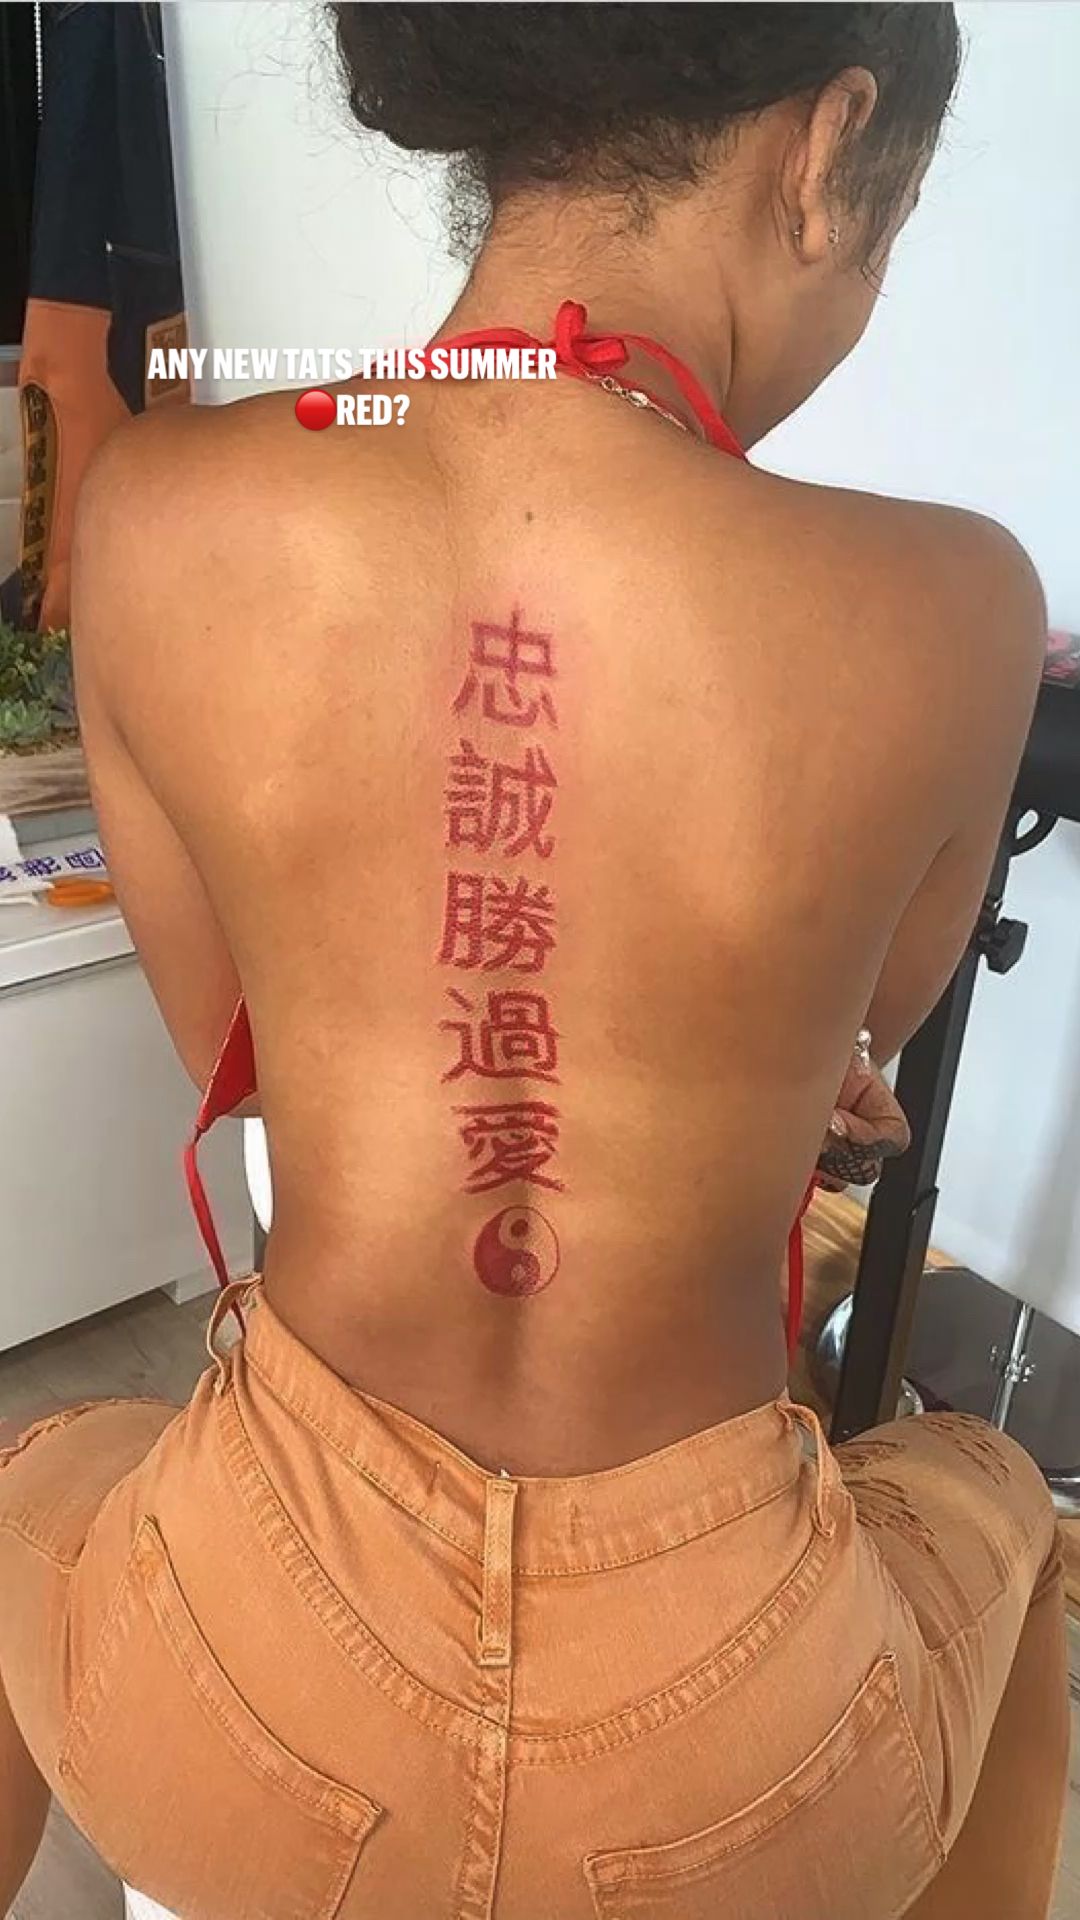 Chinese Spine Tattoos and Meanings: The Intricate Meanings Behind Popular Tattoo Styles and Symbols - Impeccable Nest